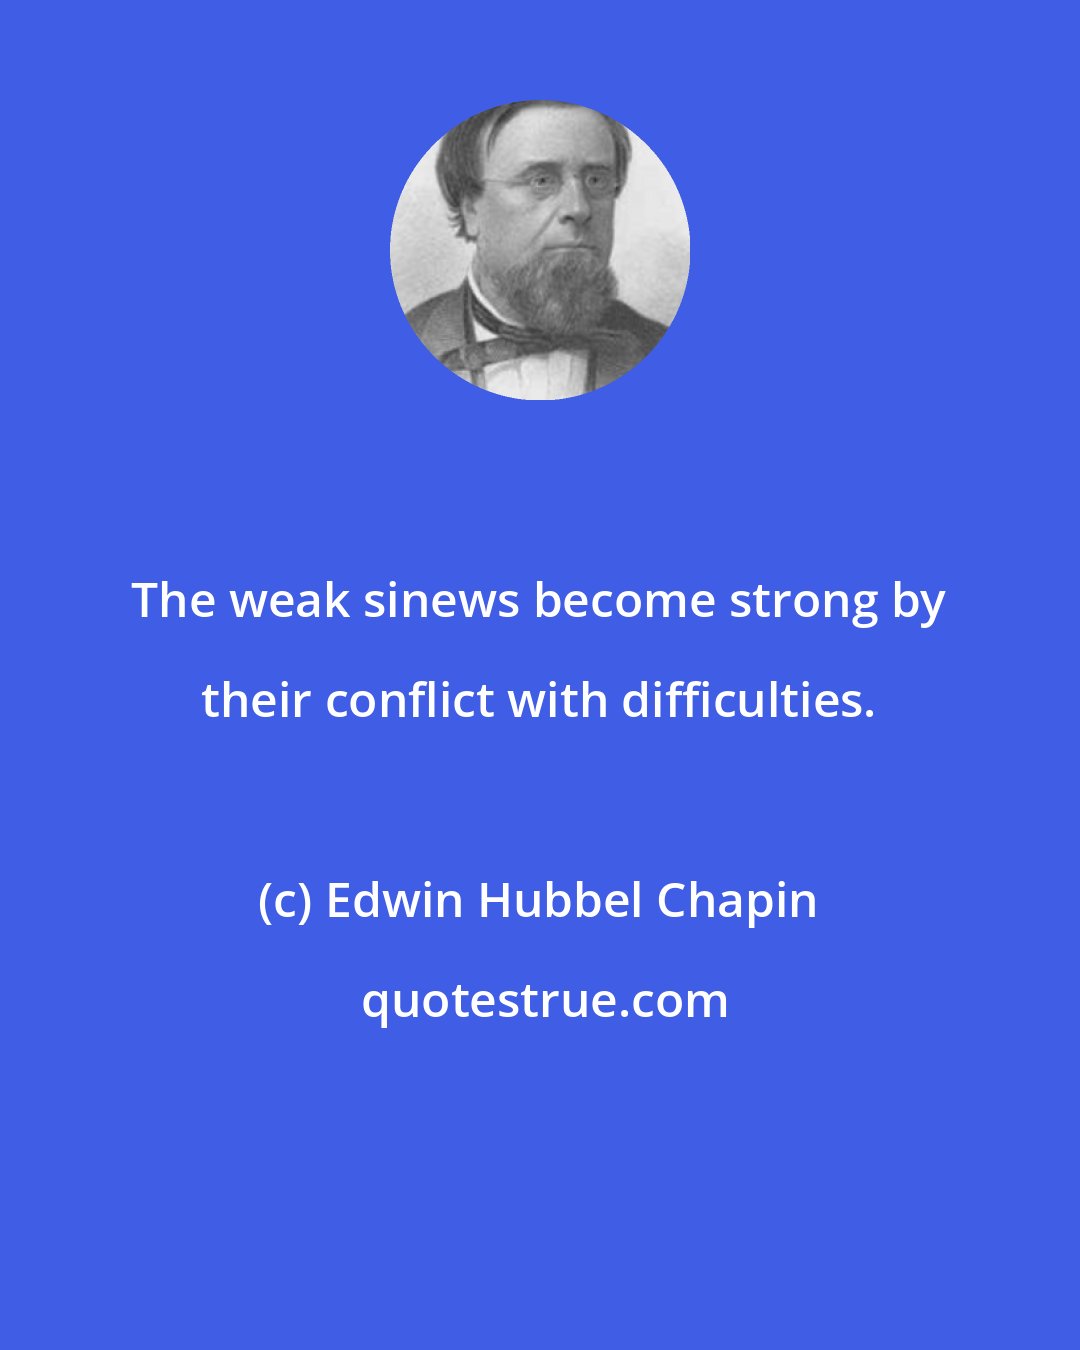 Edwin Hubbel Chapin: The weak sinews become strong by their conflict with difficulties.